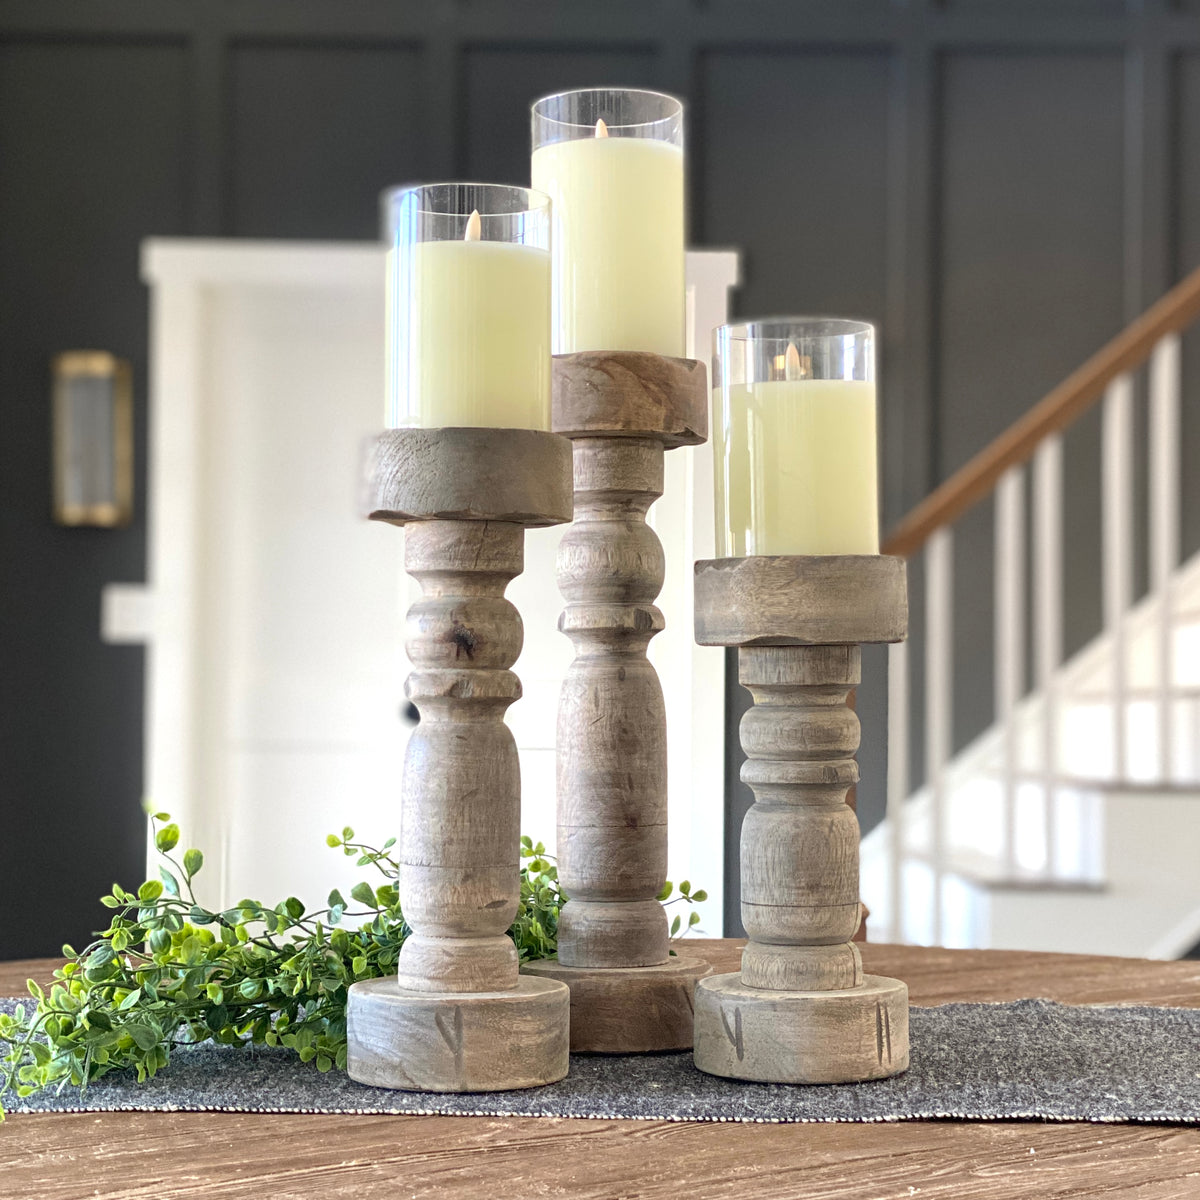 ON SALE: Chunky Wood Candlestick, choose from 3 sizes